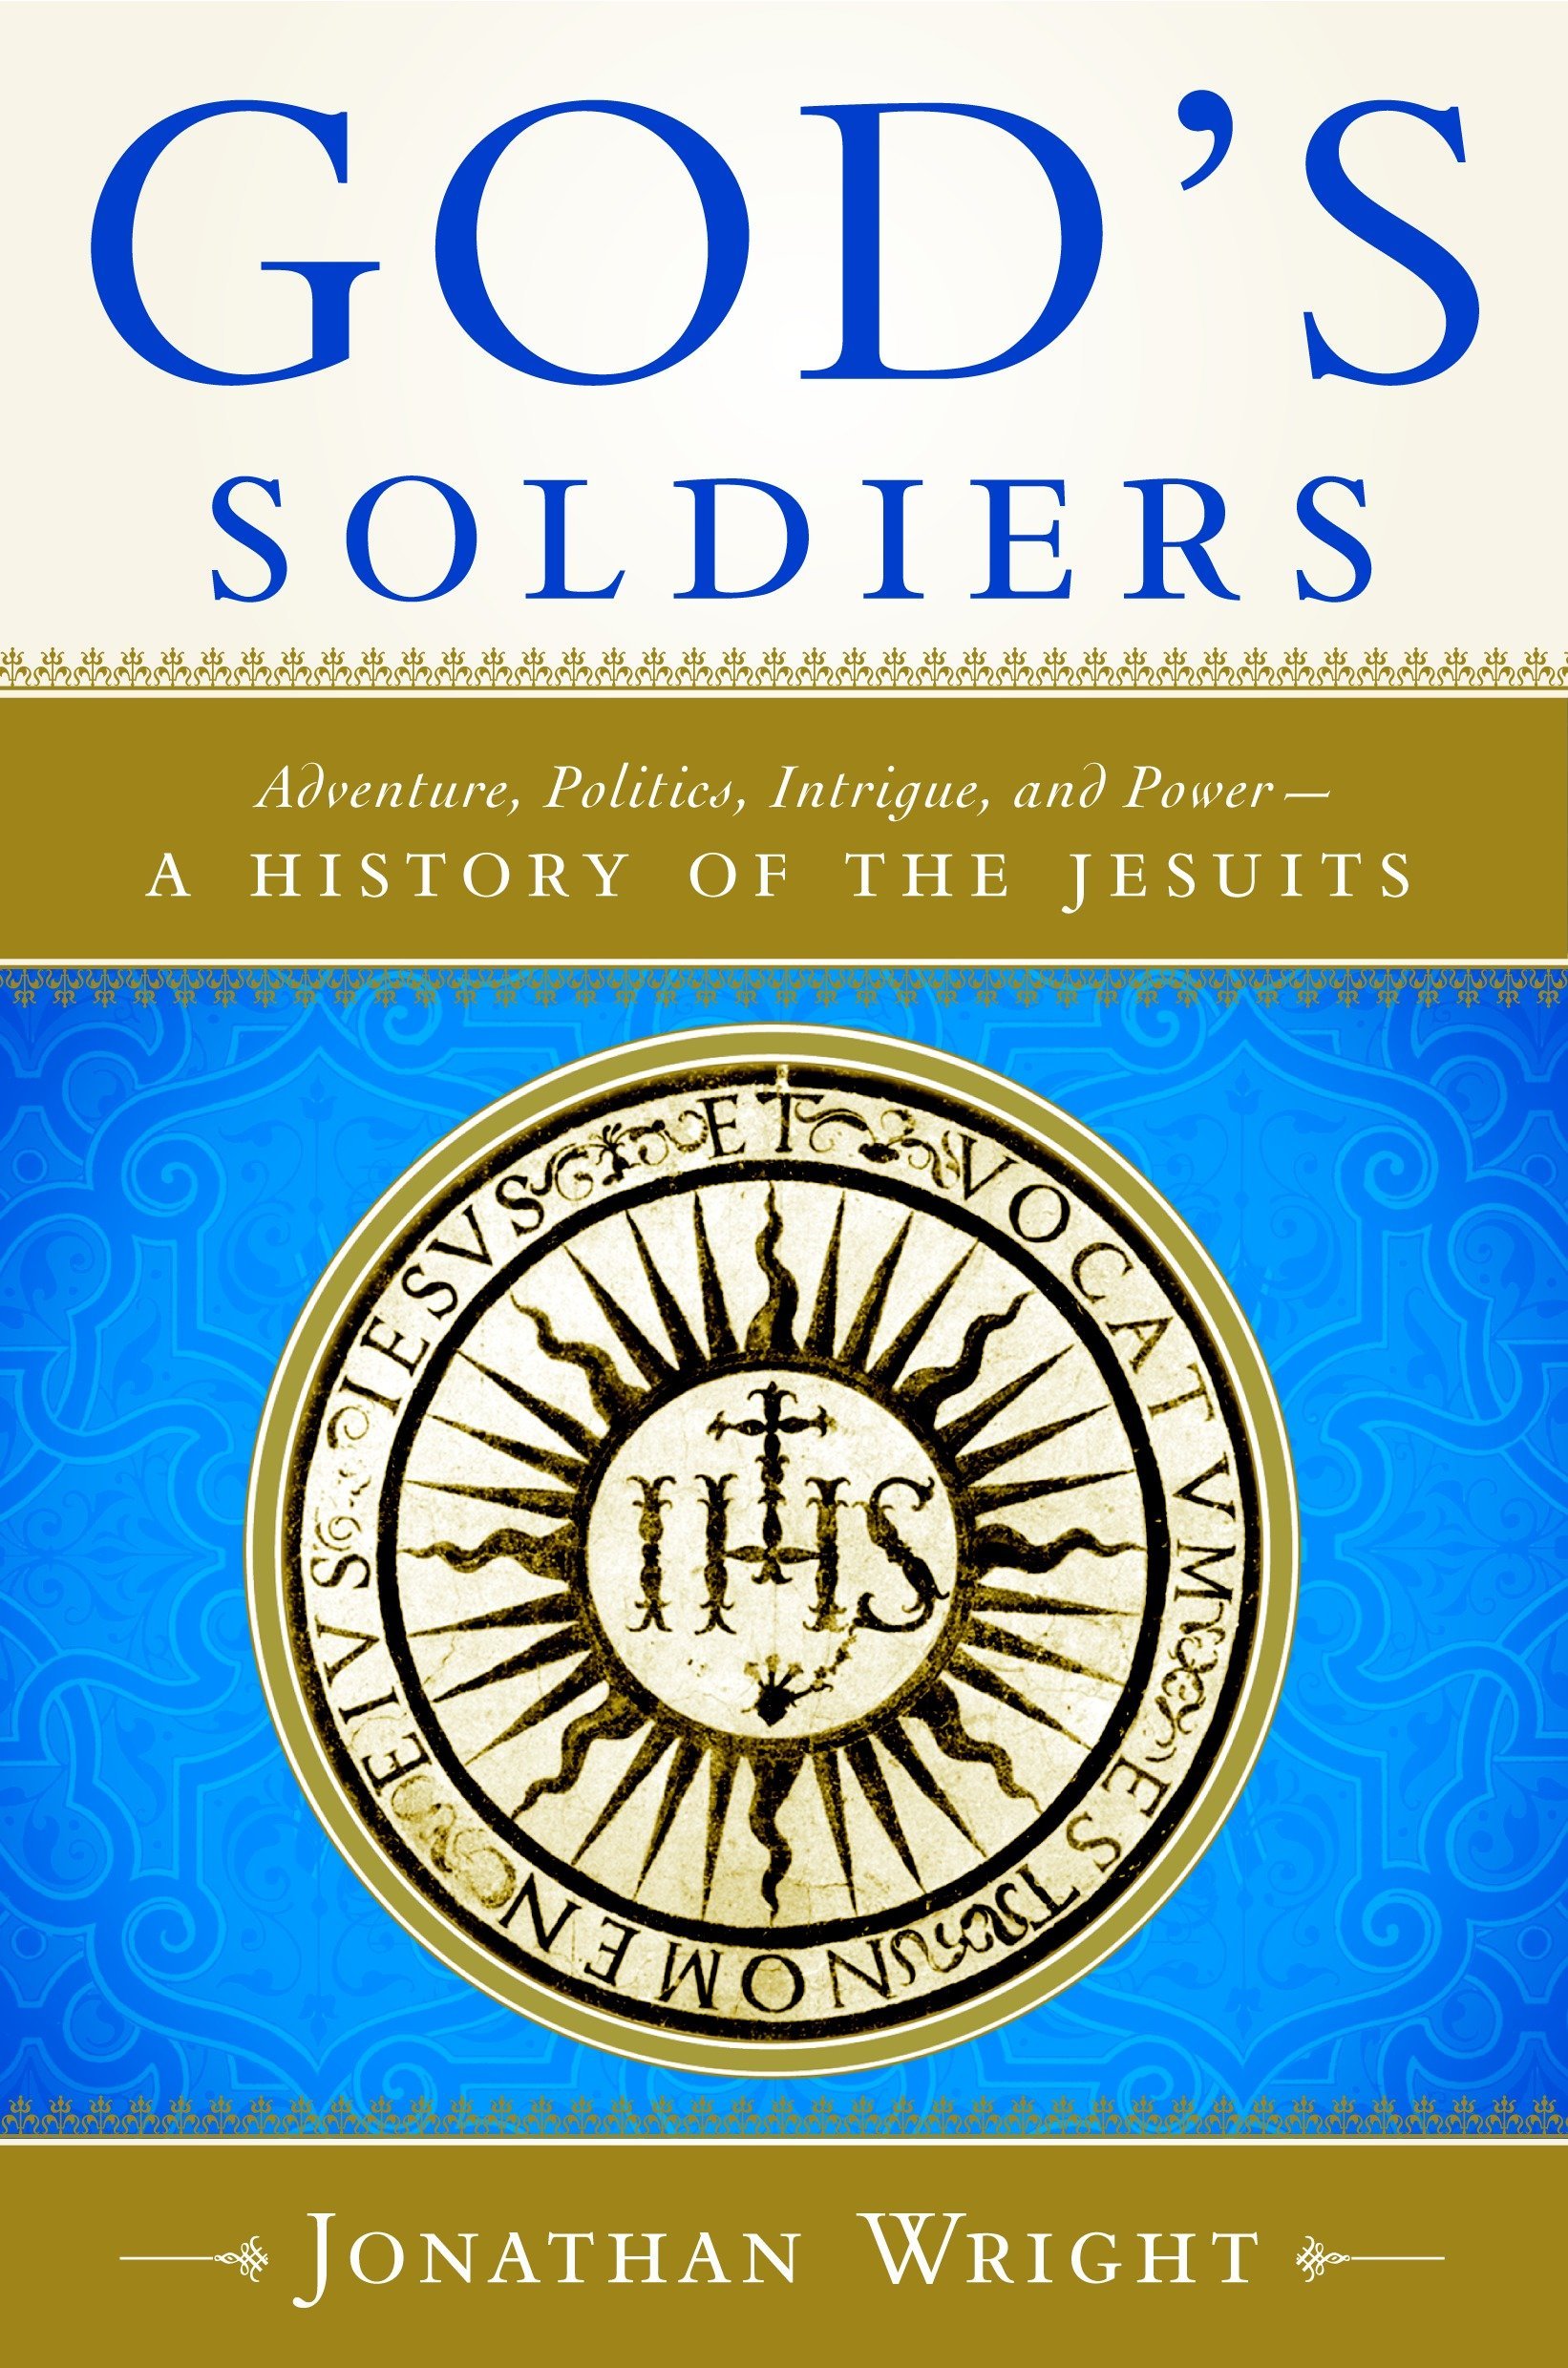 God's Soldiers: Adventure, Politics, Intrigue, and Power : a History of the Jesuits